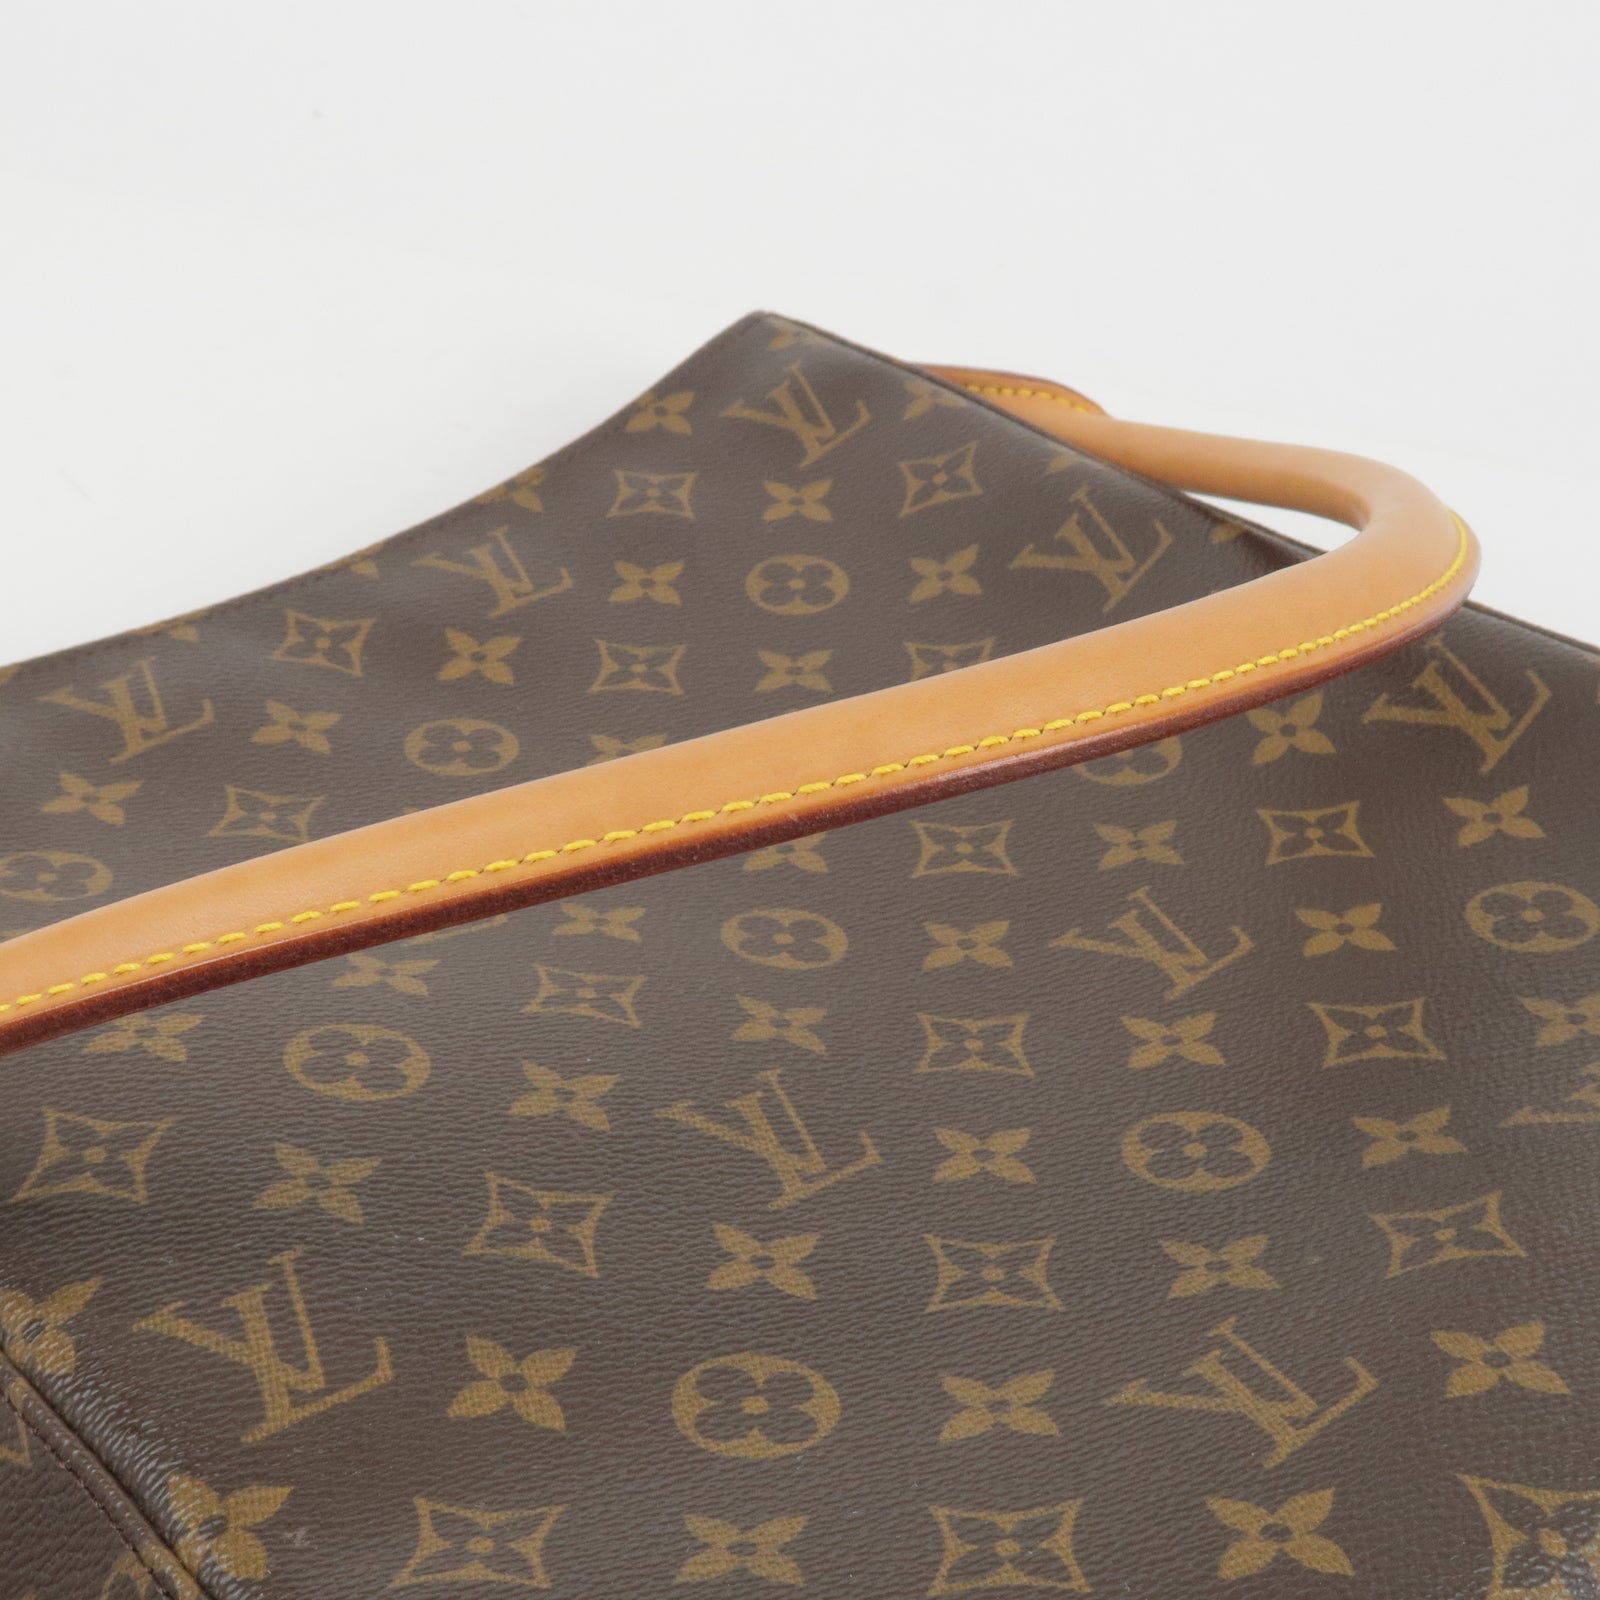 Monogram Canvas Hudson GM (Authentic Pre-Owned)